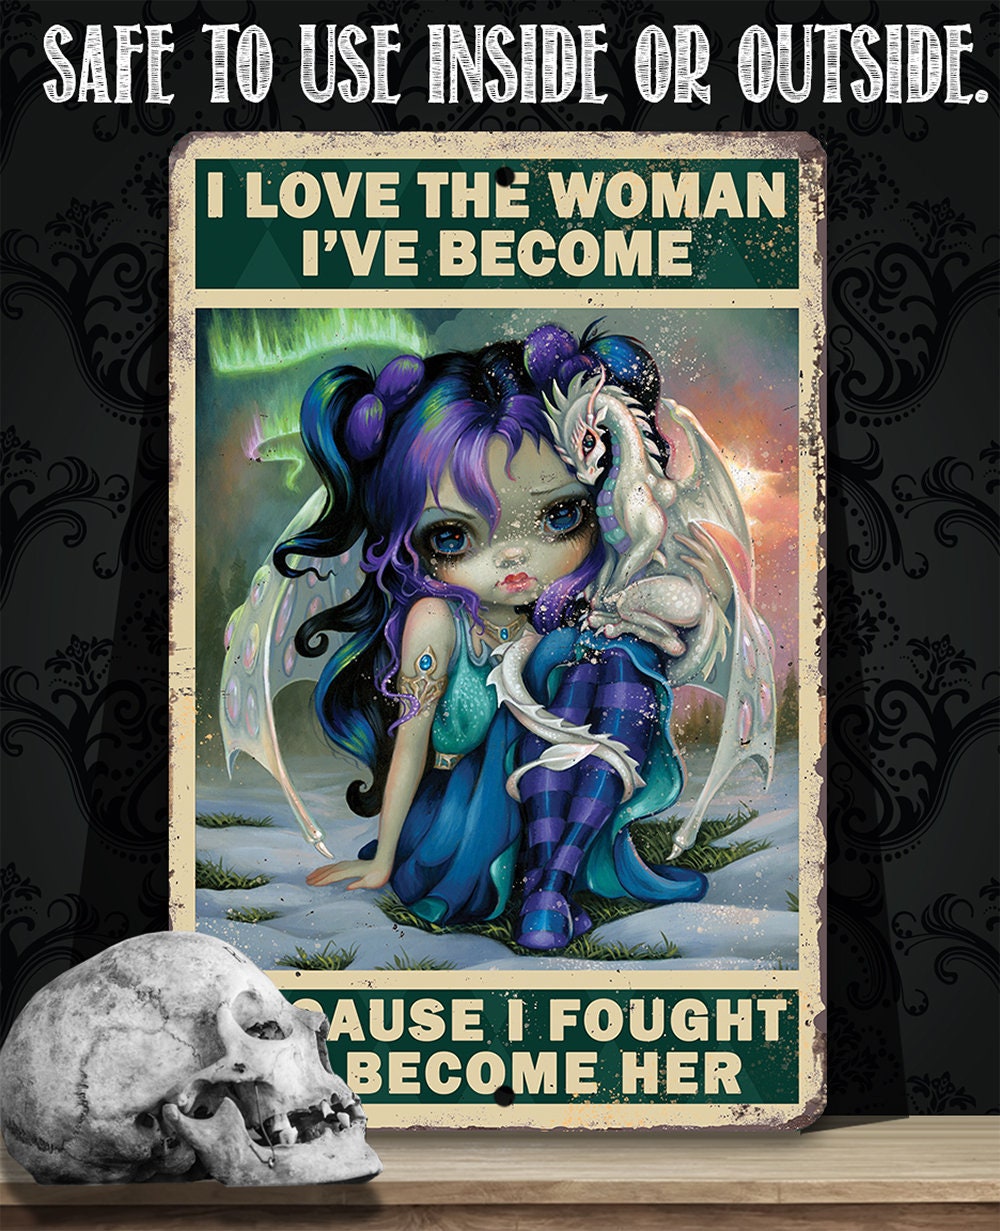 I Love The Woman I've Become - Metal Sign Metal Sign Lone Star Art 